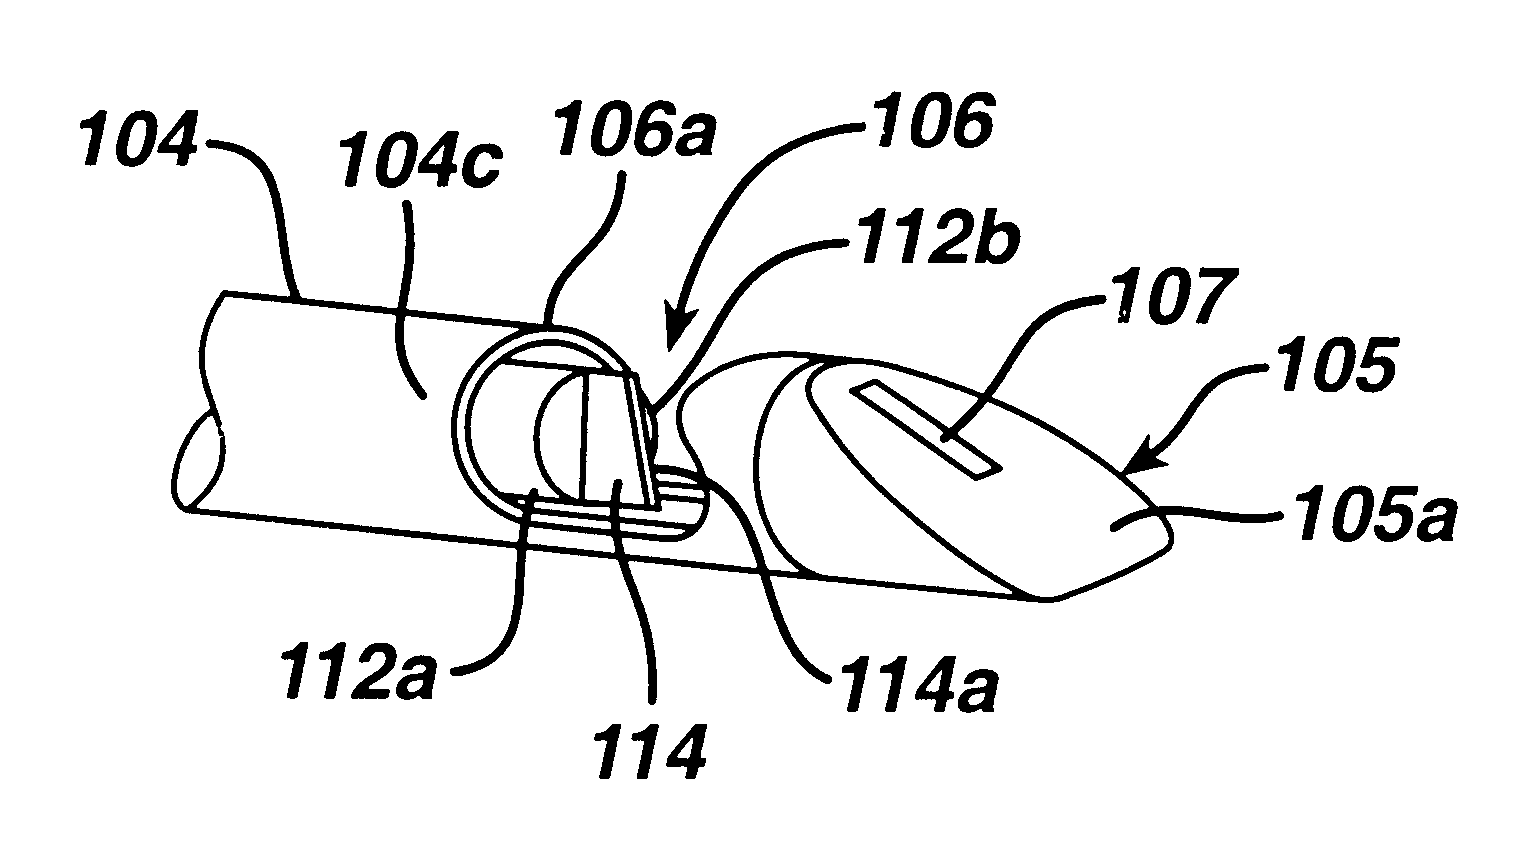 Surgical device for clamping, ligating, and severing tissue